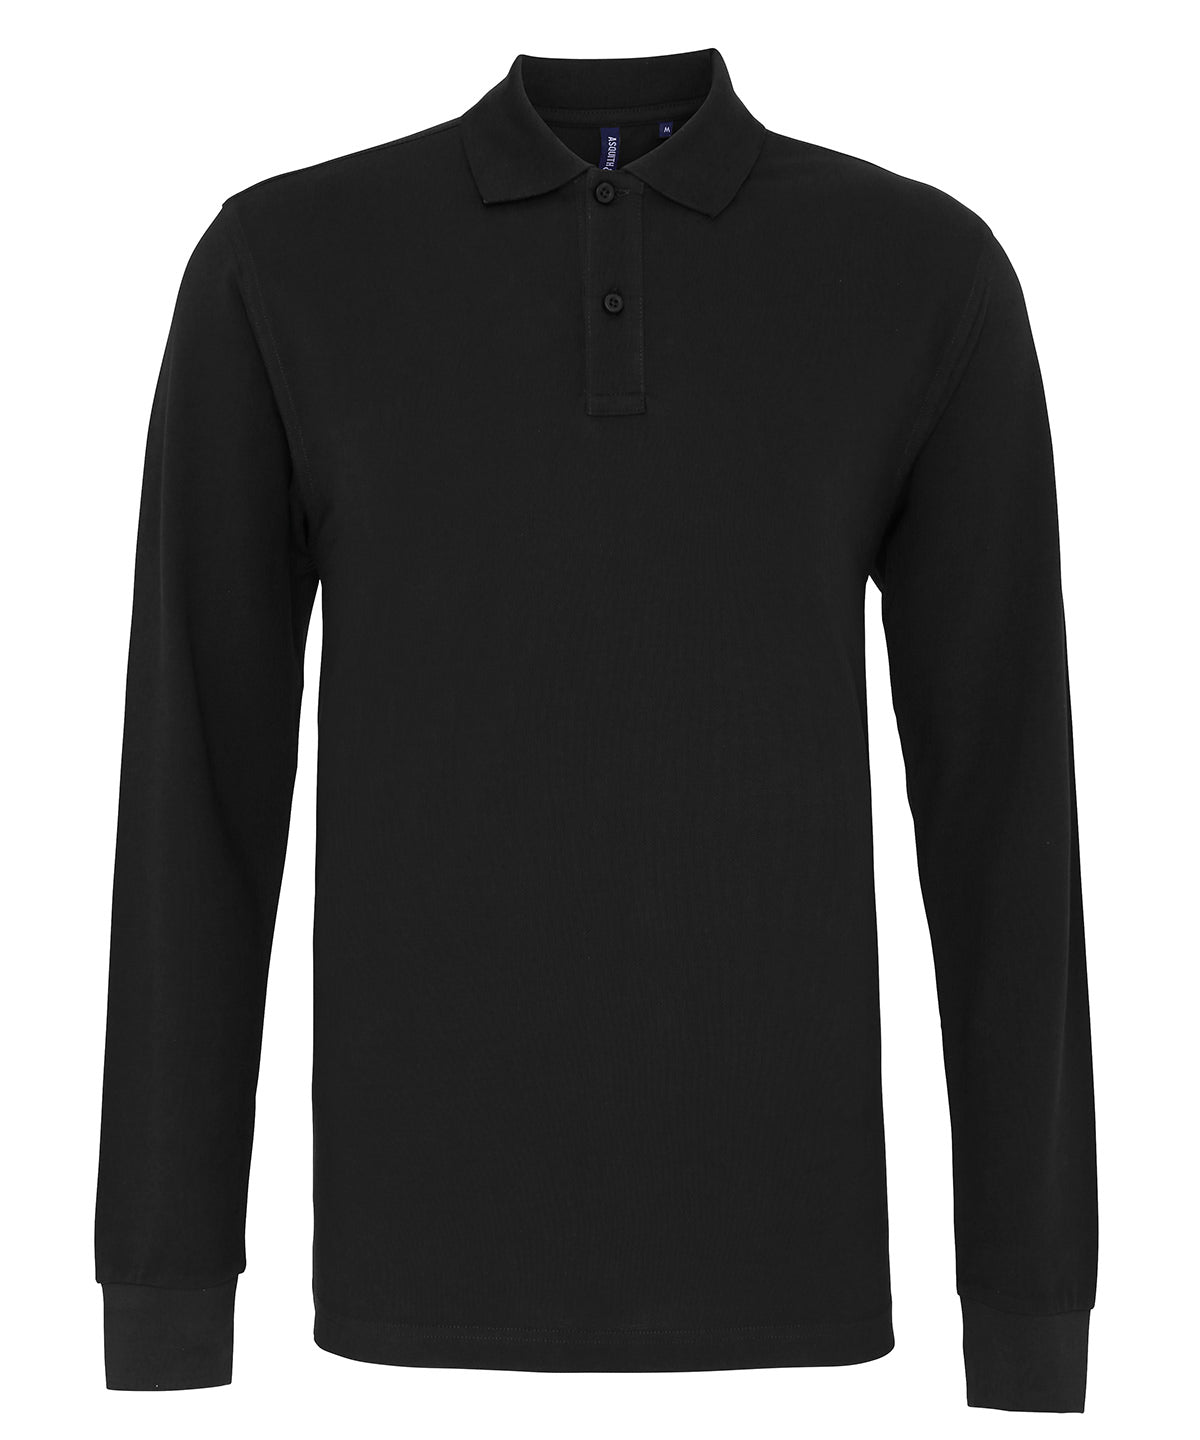 Personalised Polo Shirts - Black Asquith & Fox Men's classic fit long sleeved polo